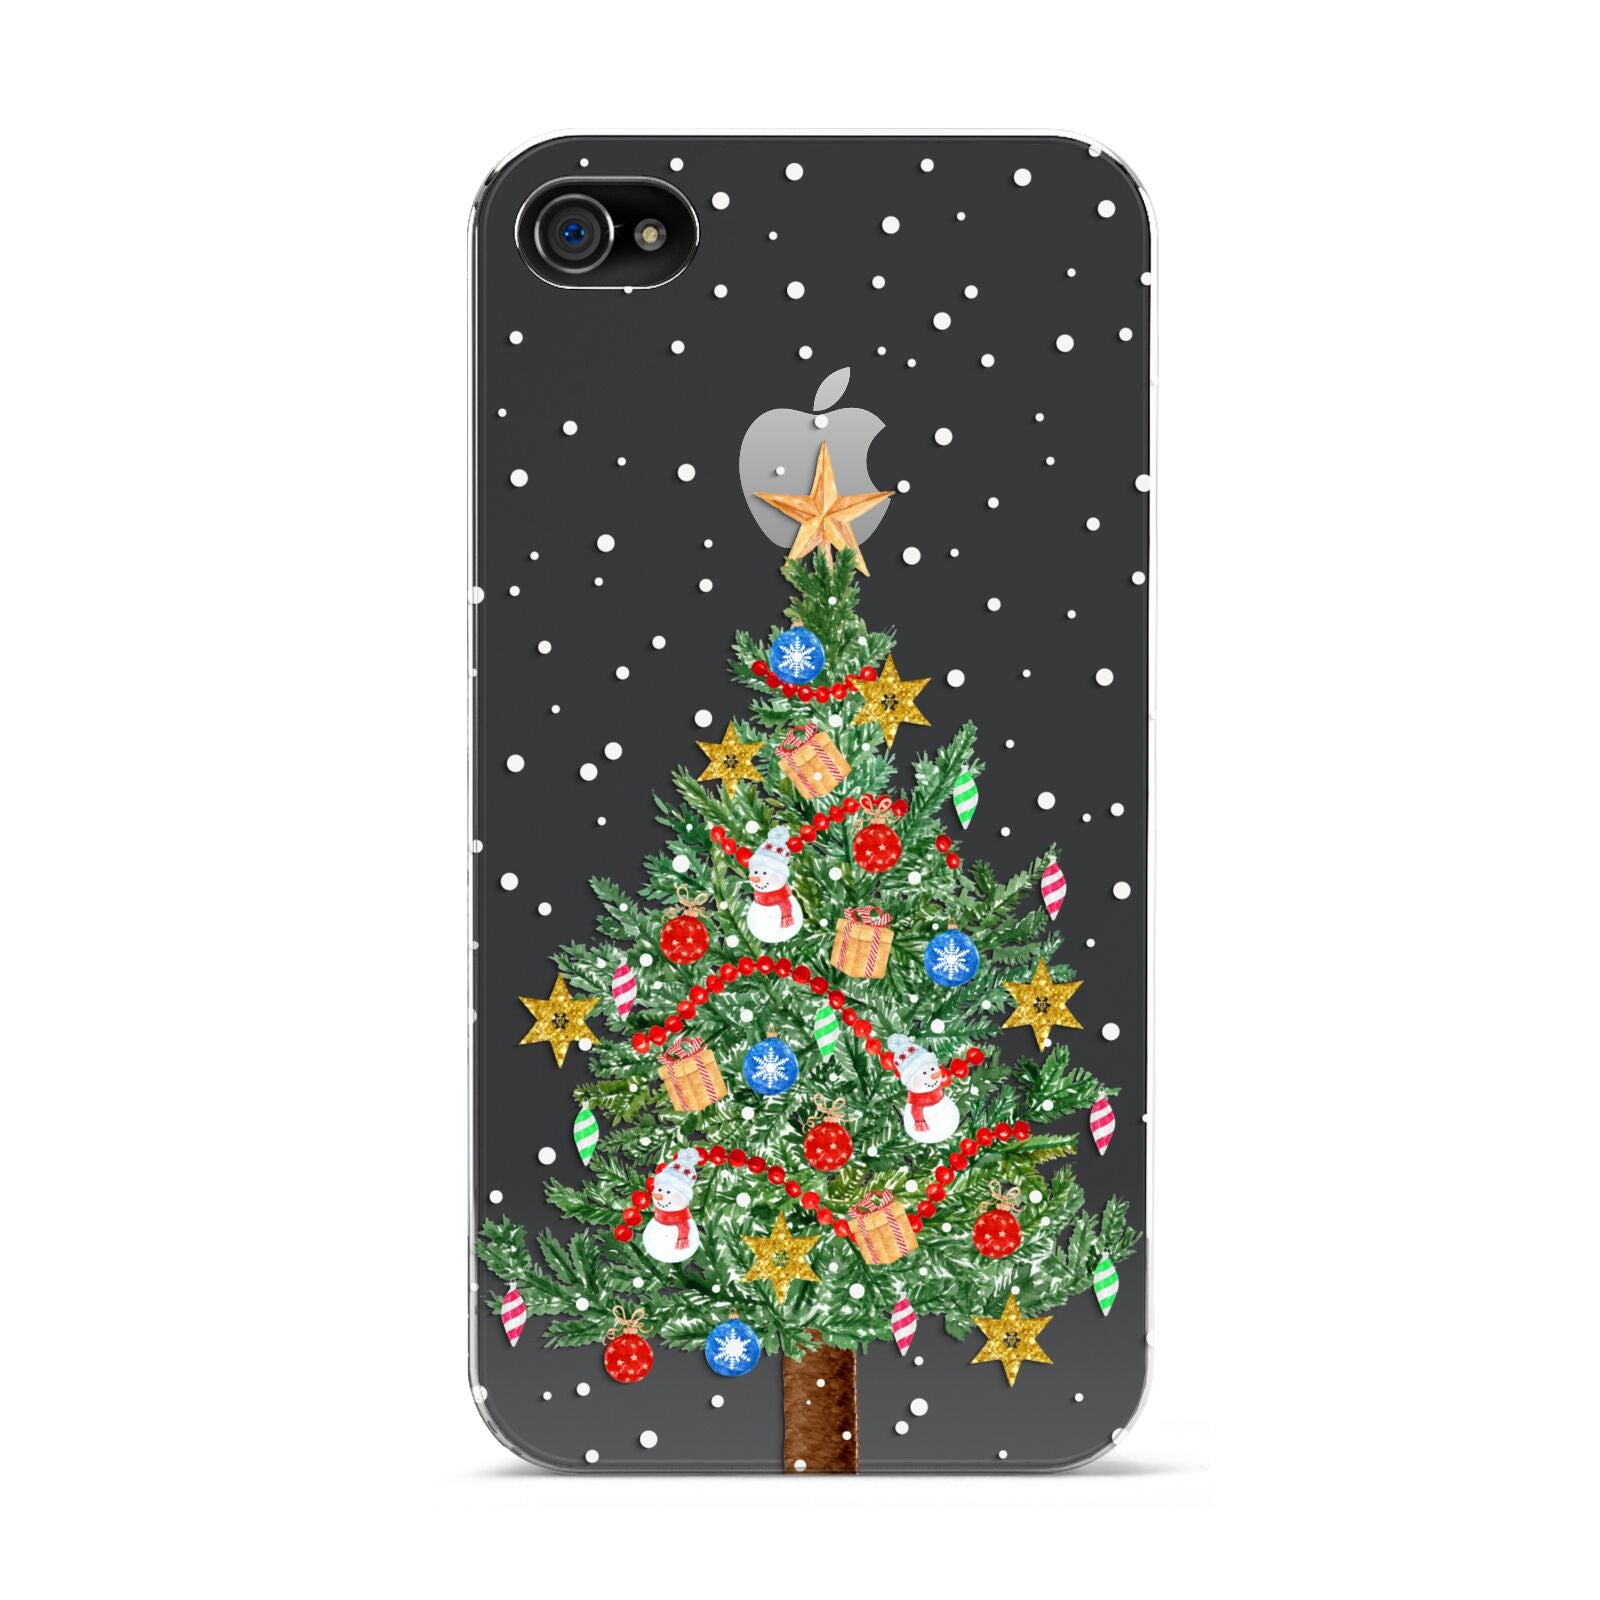 Sparkling Christmas Tree Apple iPhone 4s Case